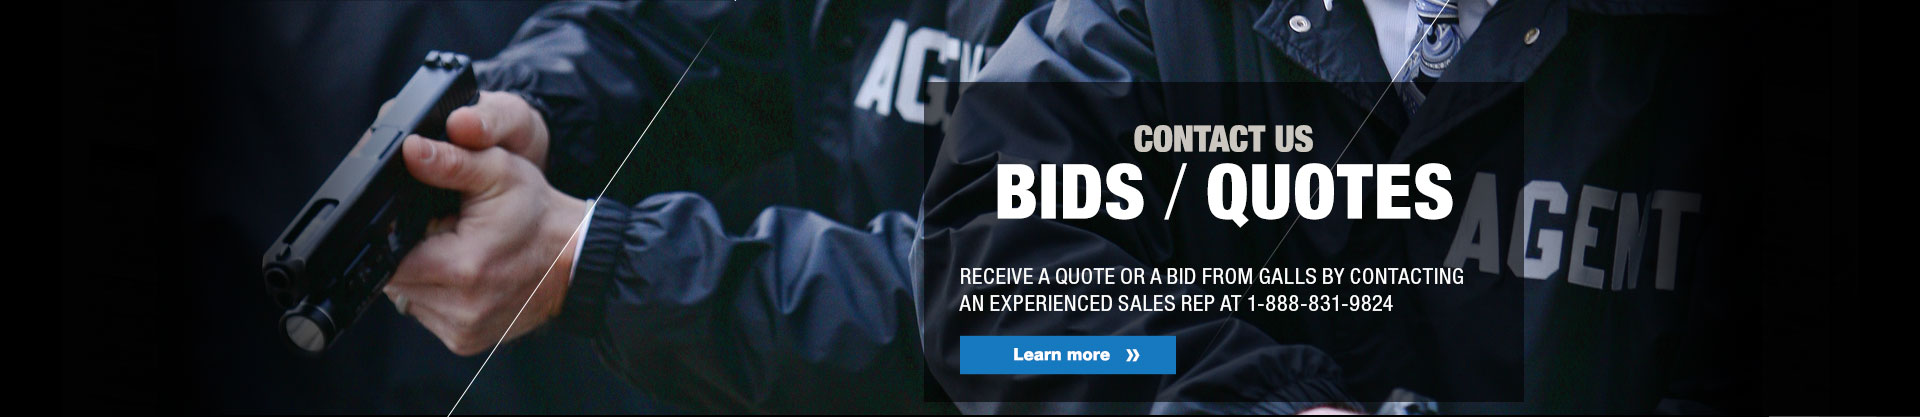 Contact us - bids and quotes